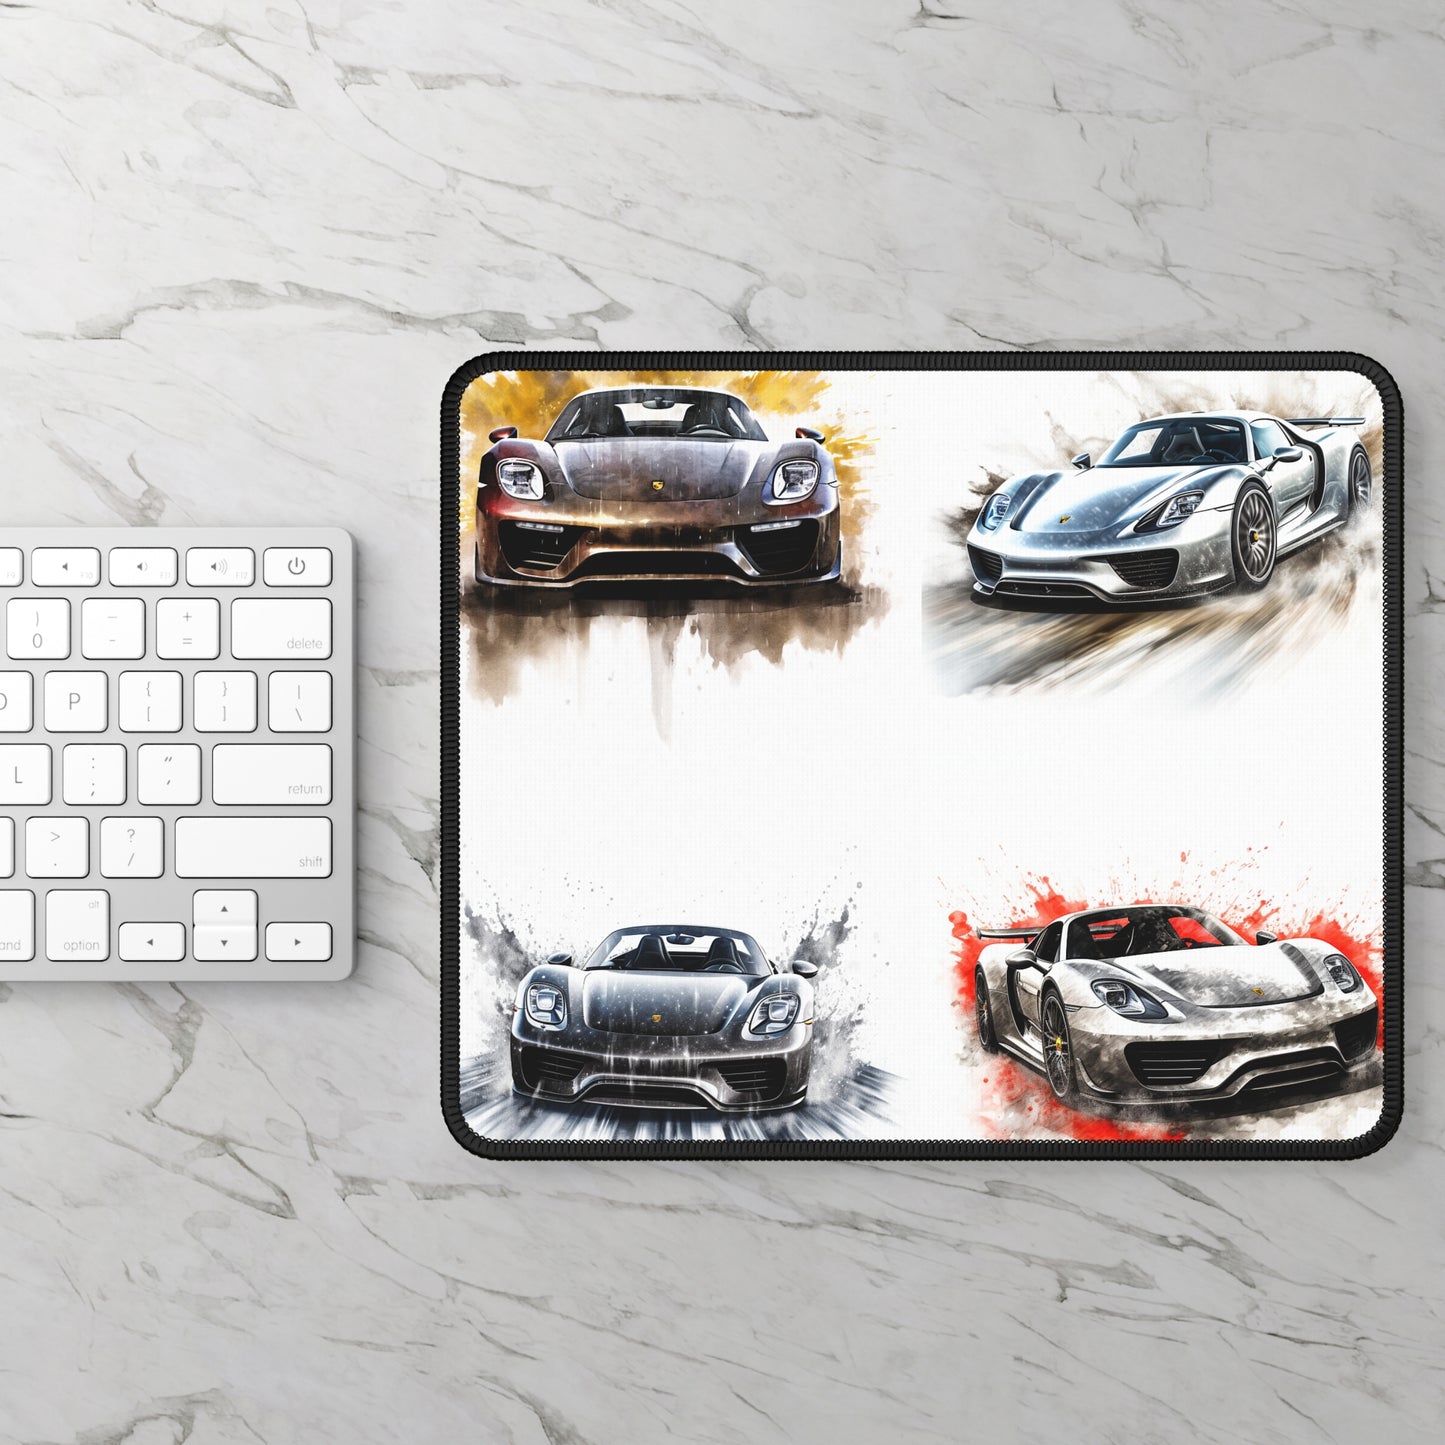 Gaming Mouse Pad  918 Spyder white background driving fast with water splashing 5